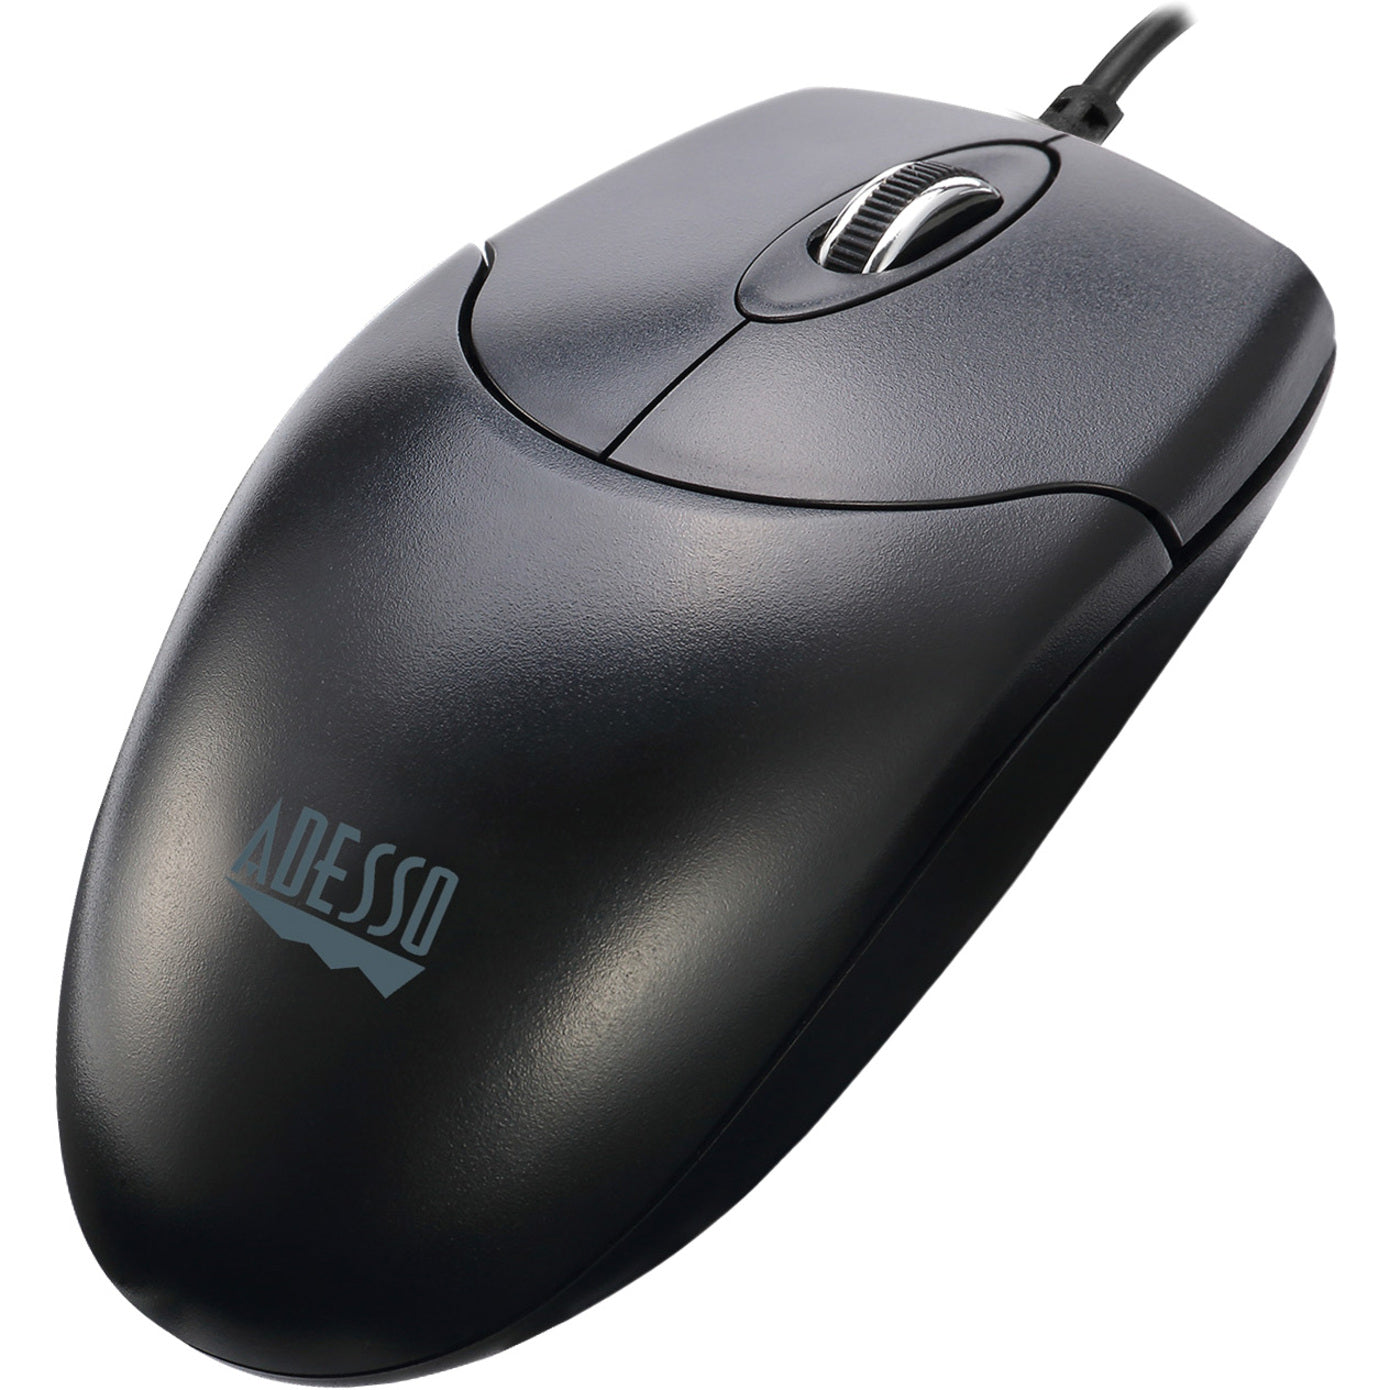 Adesso IMOUSEM6-TAA iMouse M6-TAA Optical Scroll Mouse, USB Wired, 1000 DPI, 2-Year Warranty